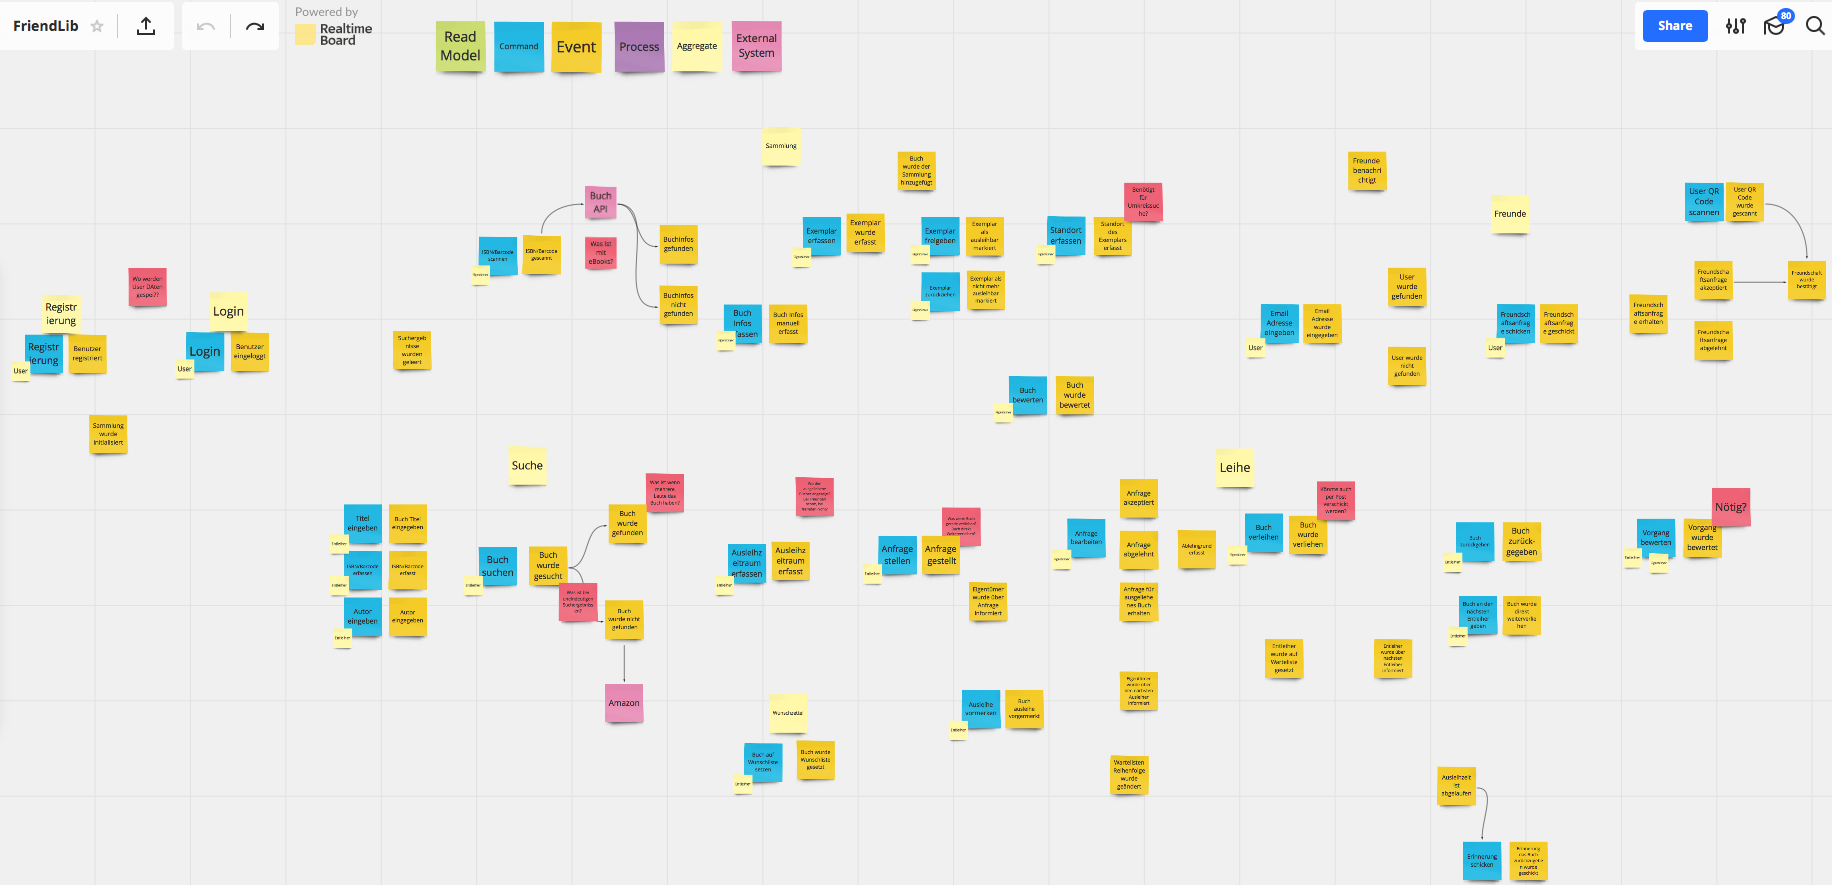 FriendLib Event Storming in RealTimeBoard